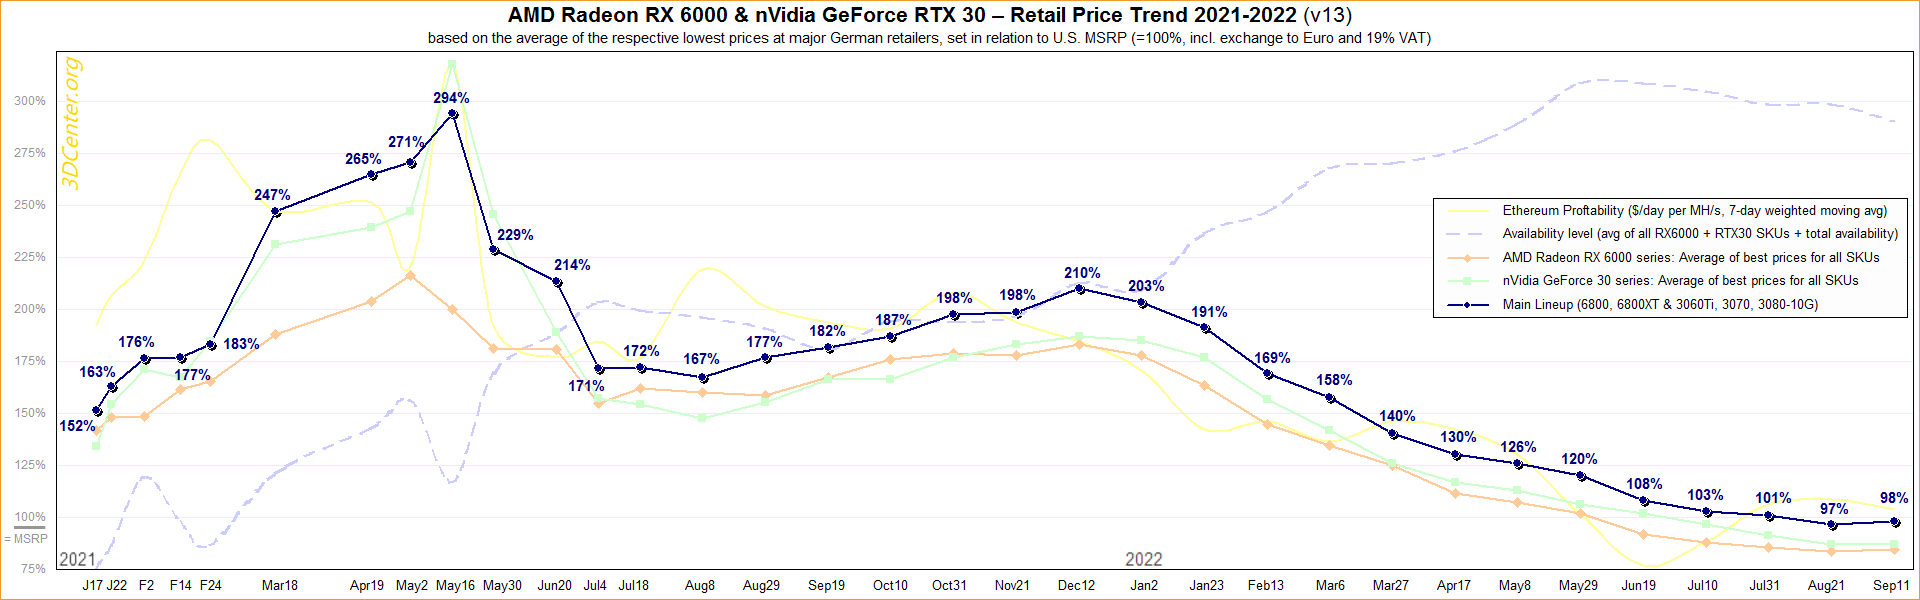 AMD-nVidia-Retail-Price-Trend-2021-2022-v13.png